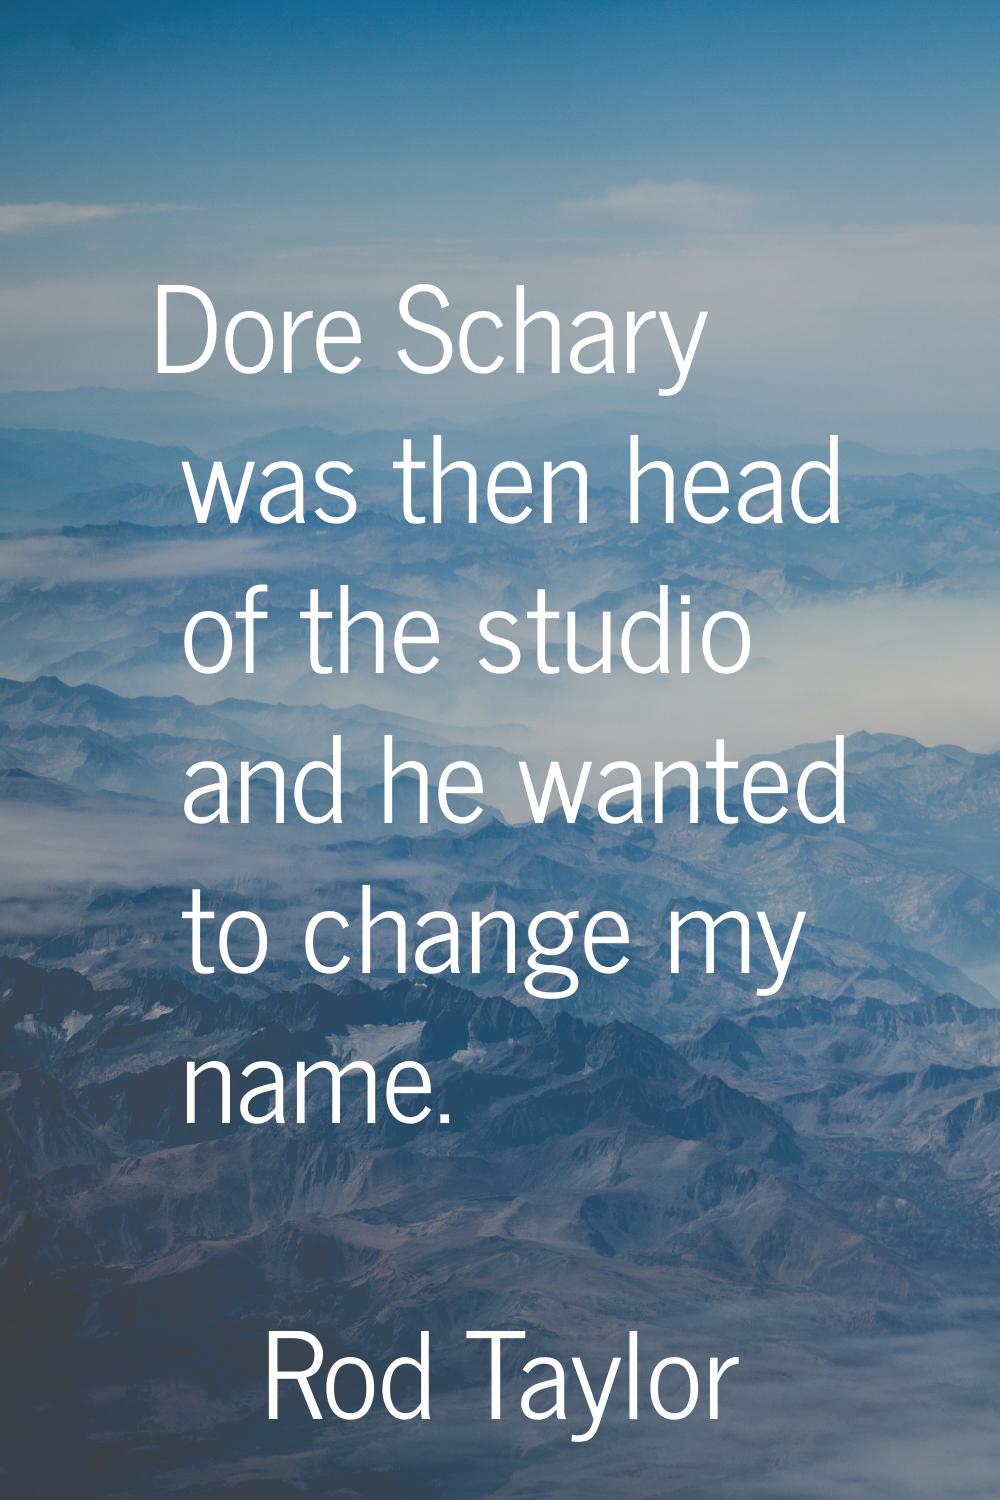 Dore Schary was then head of the studio and he wanted to change my name.